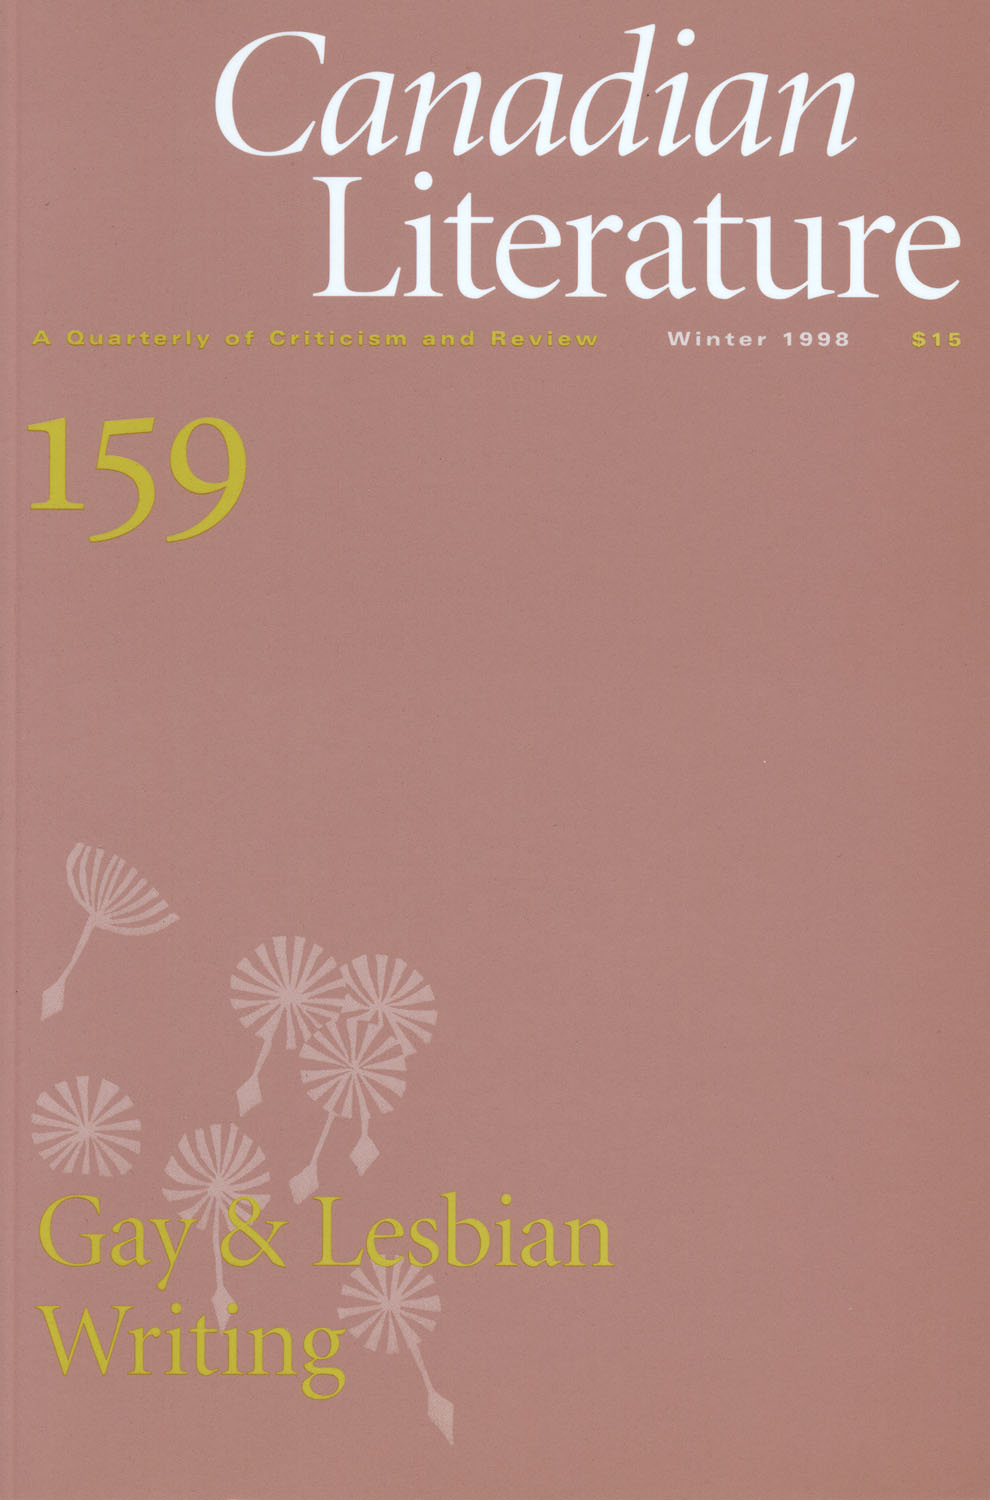 					Afficher No. 159 (1998): Gay and Lesbian Writing in Canadian Literature
				